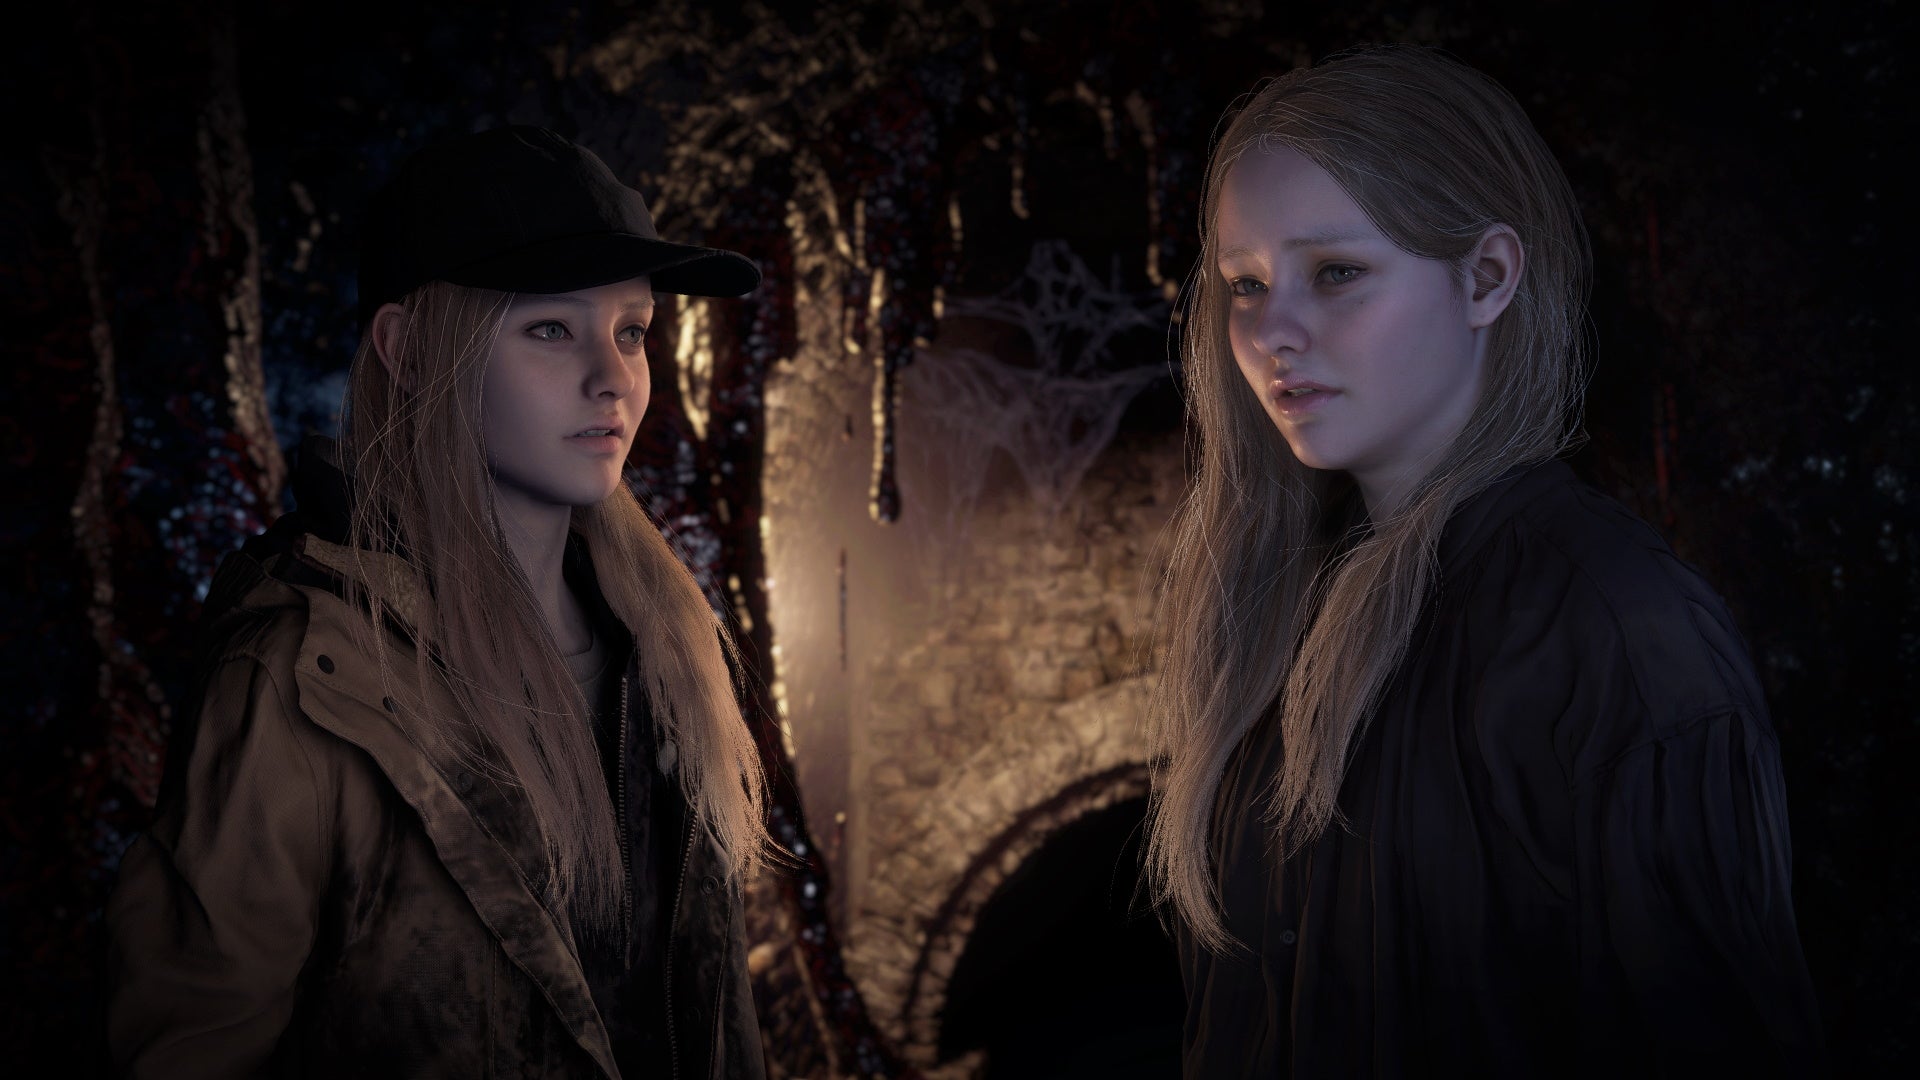 Two identical blonde haired girls look scared in a dark dungeon in Resident Evil Village's Shadows Of Rose DLC